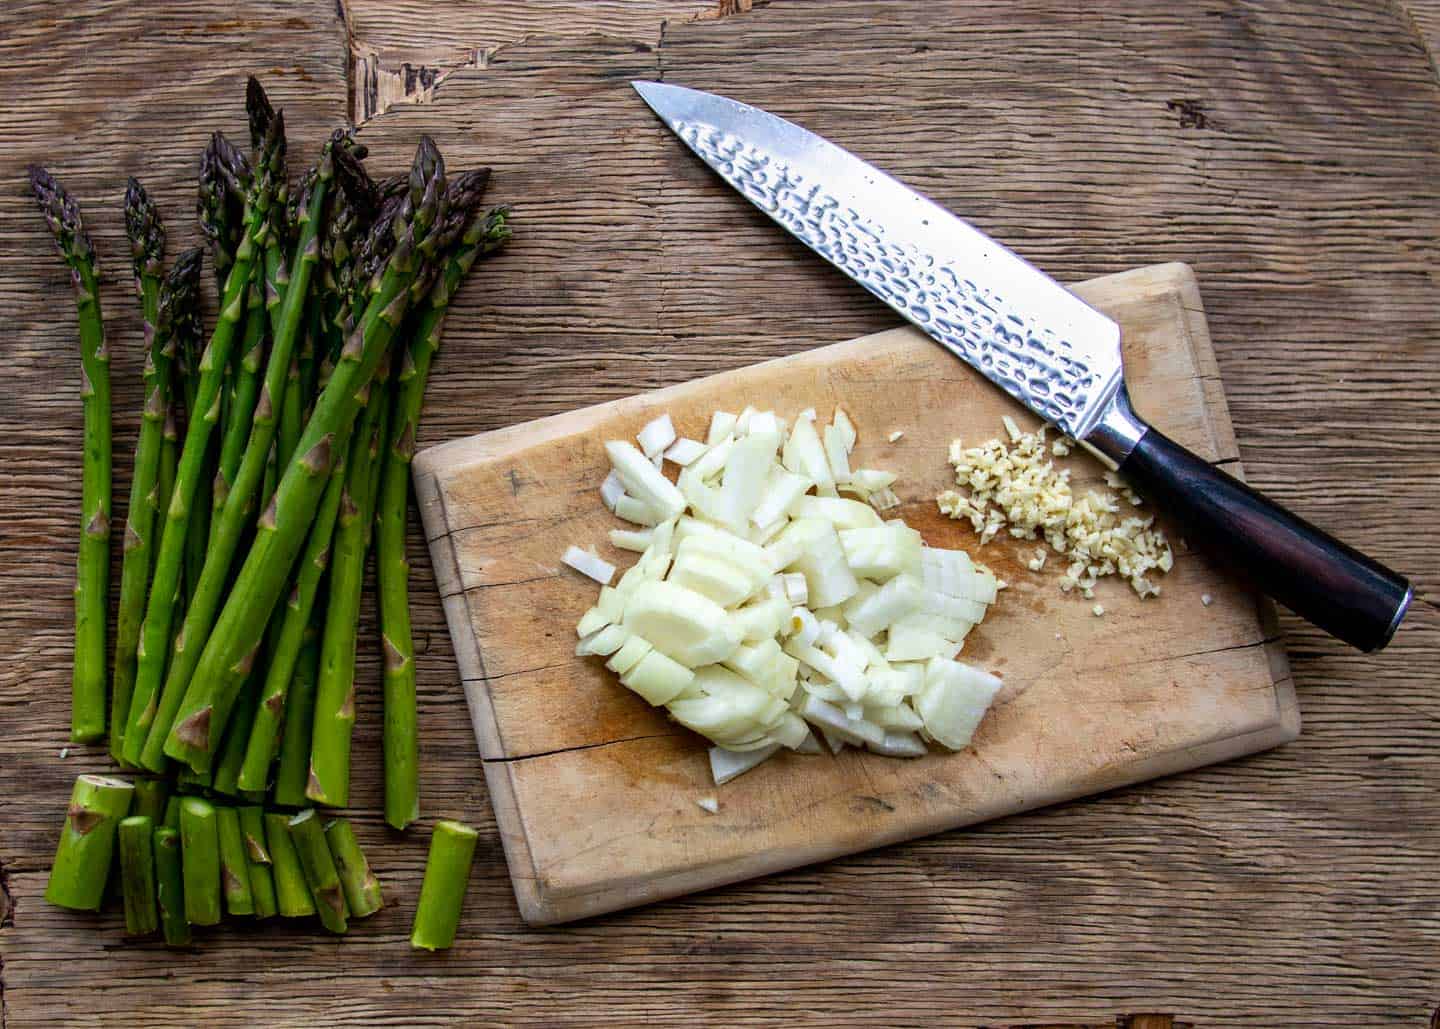 Chopped onion and asparagus on cutting board